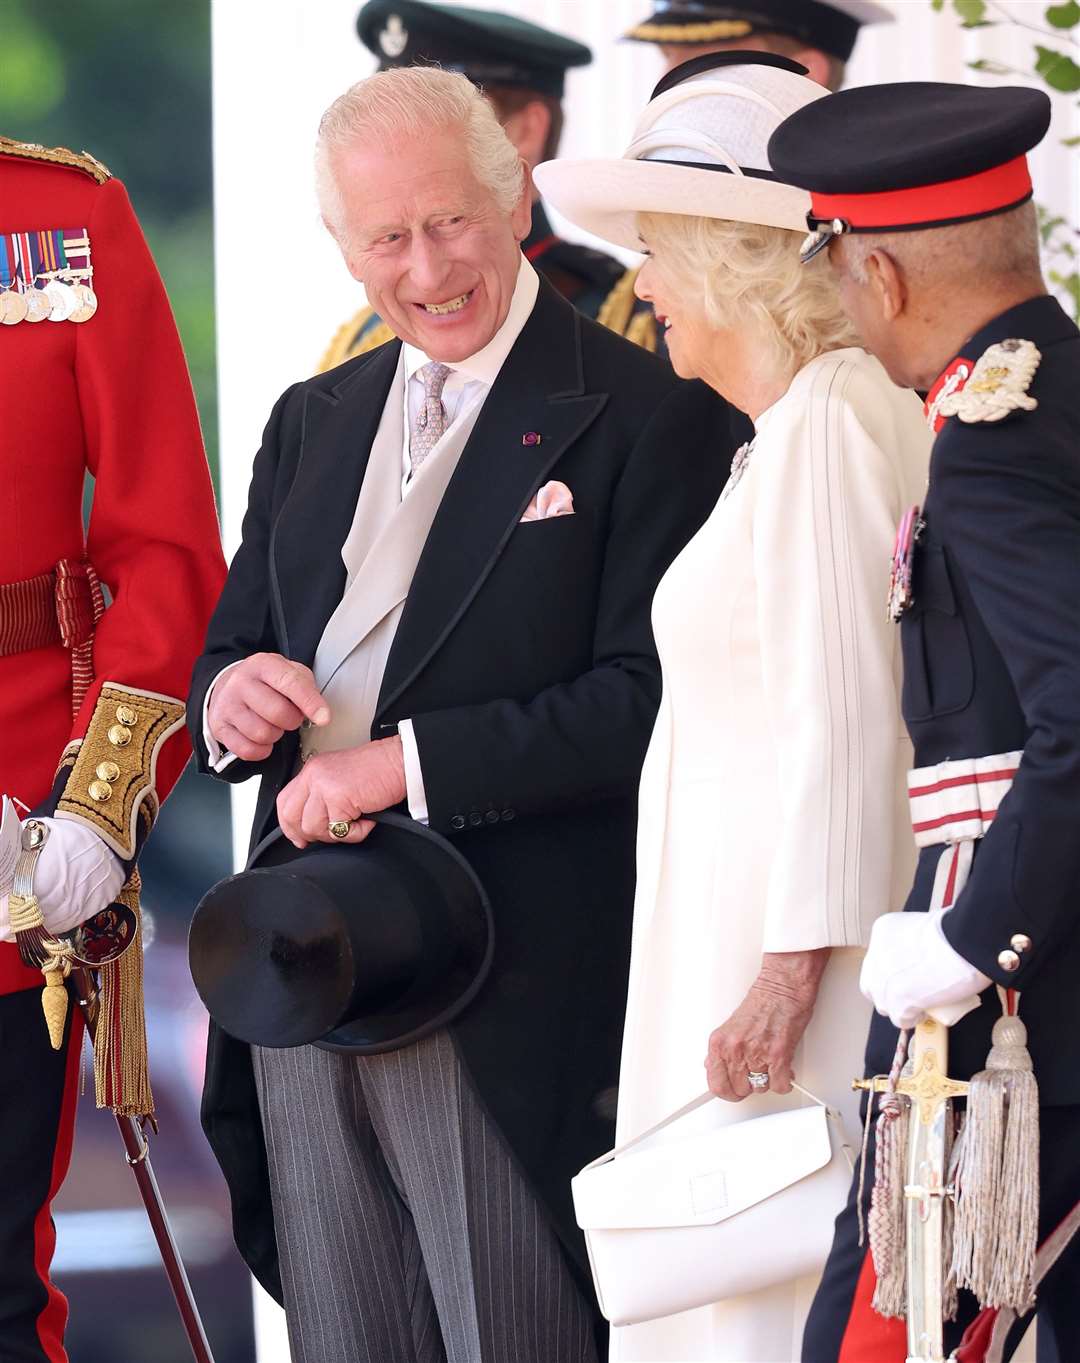 The King smiles as he chats to Camilla ahead of the ceremonial welcome at Horse Guards Parade (Chris Jackson/PA)